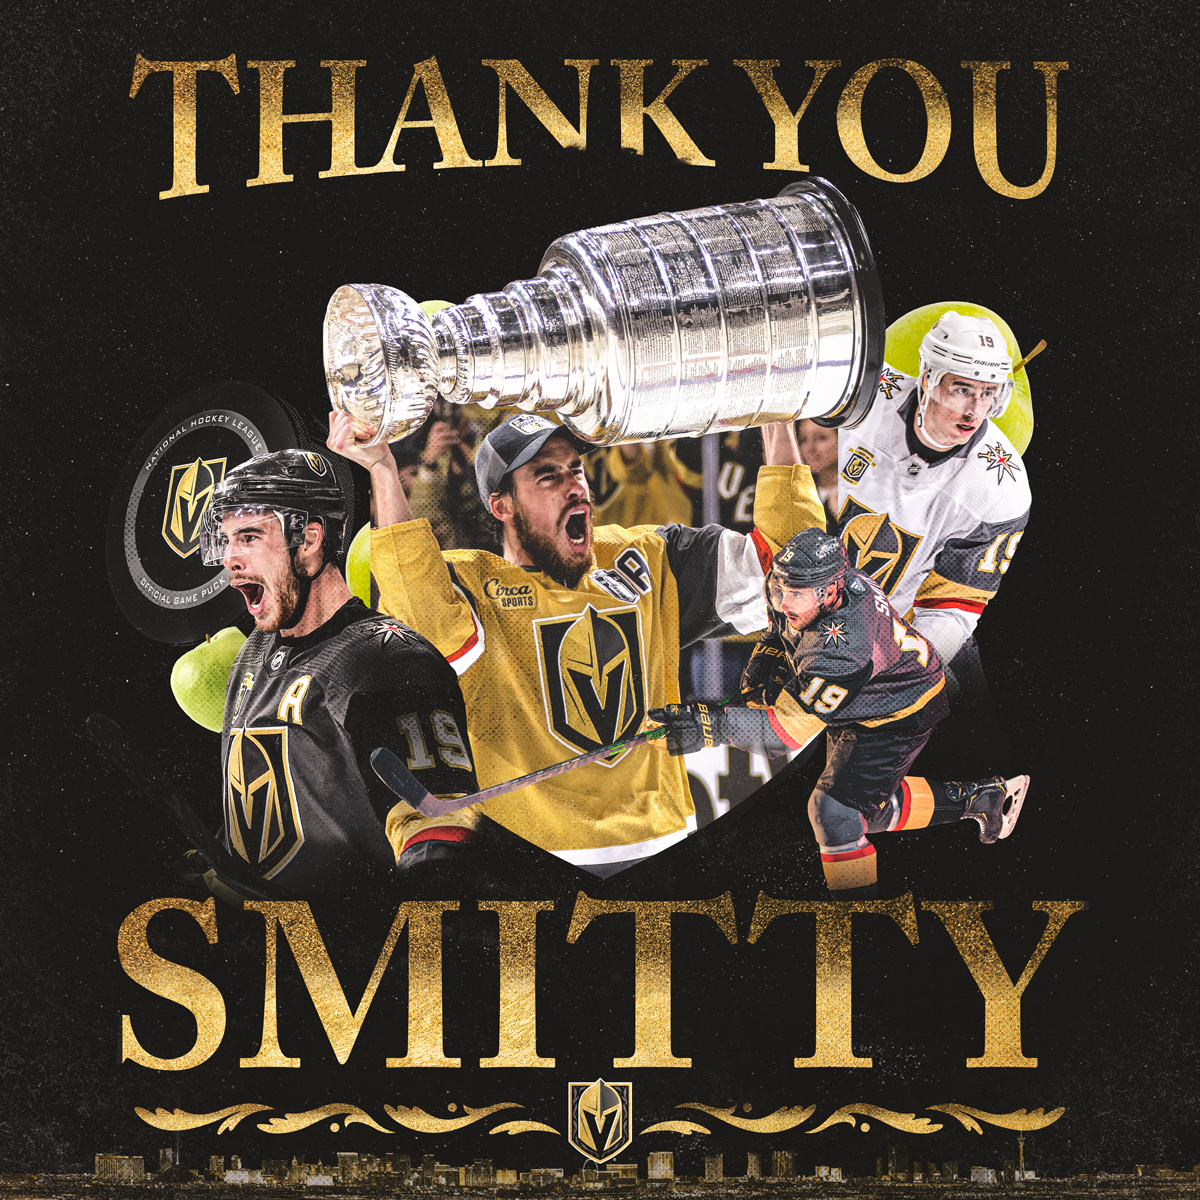 An original Misfit. A leader on the ice and in our community. A Stanley Cup Champion.

Thanks for the memories, Reilly. Vegas will always love you 🍏💛

#VegasBorn